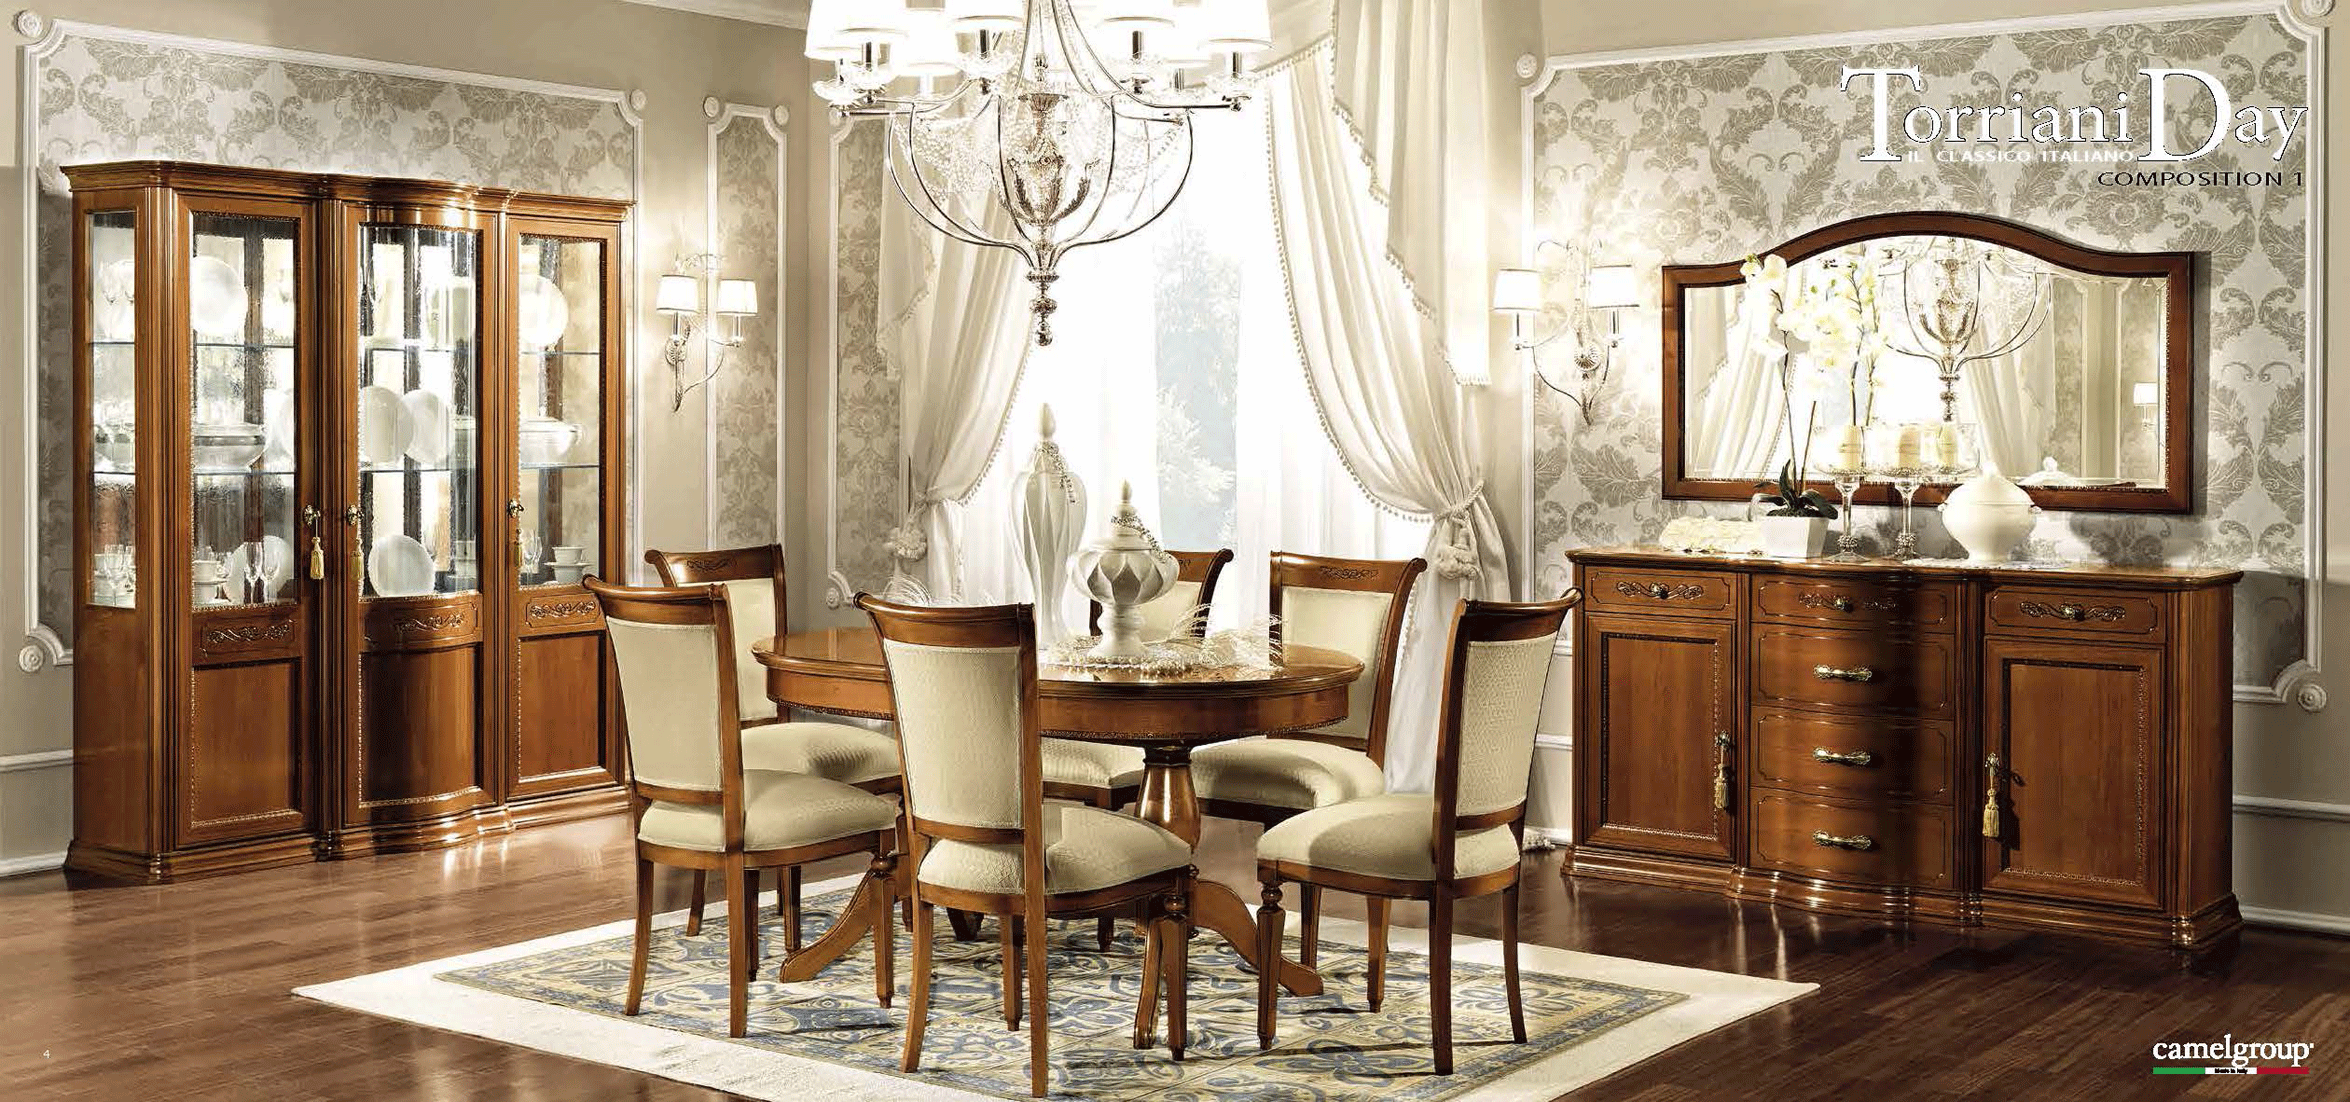 Dining Room Furniture Chairs Torriani Day